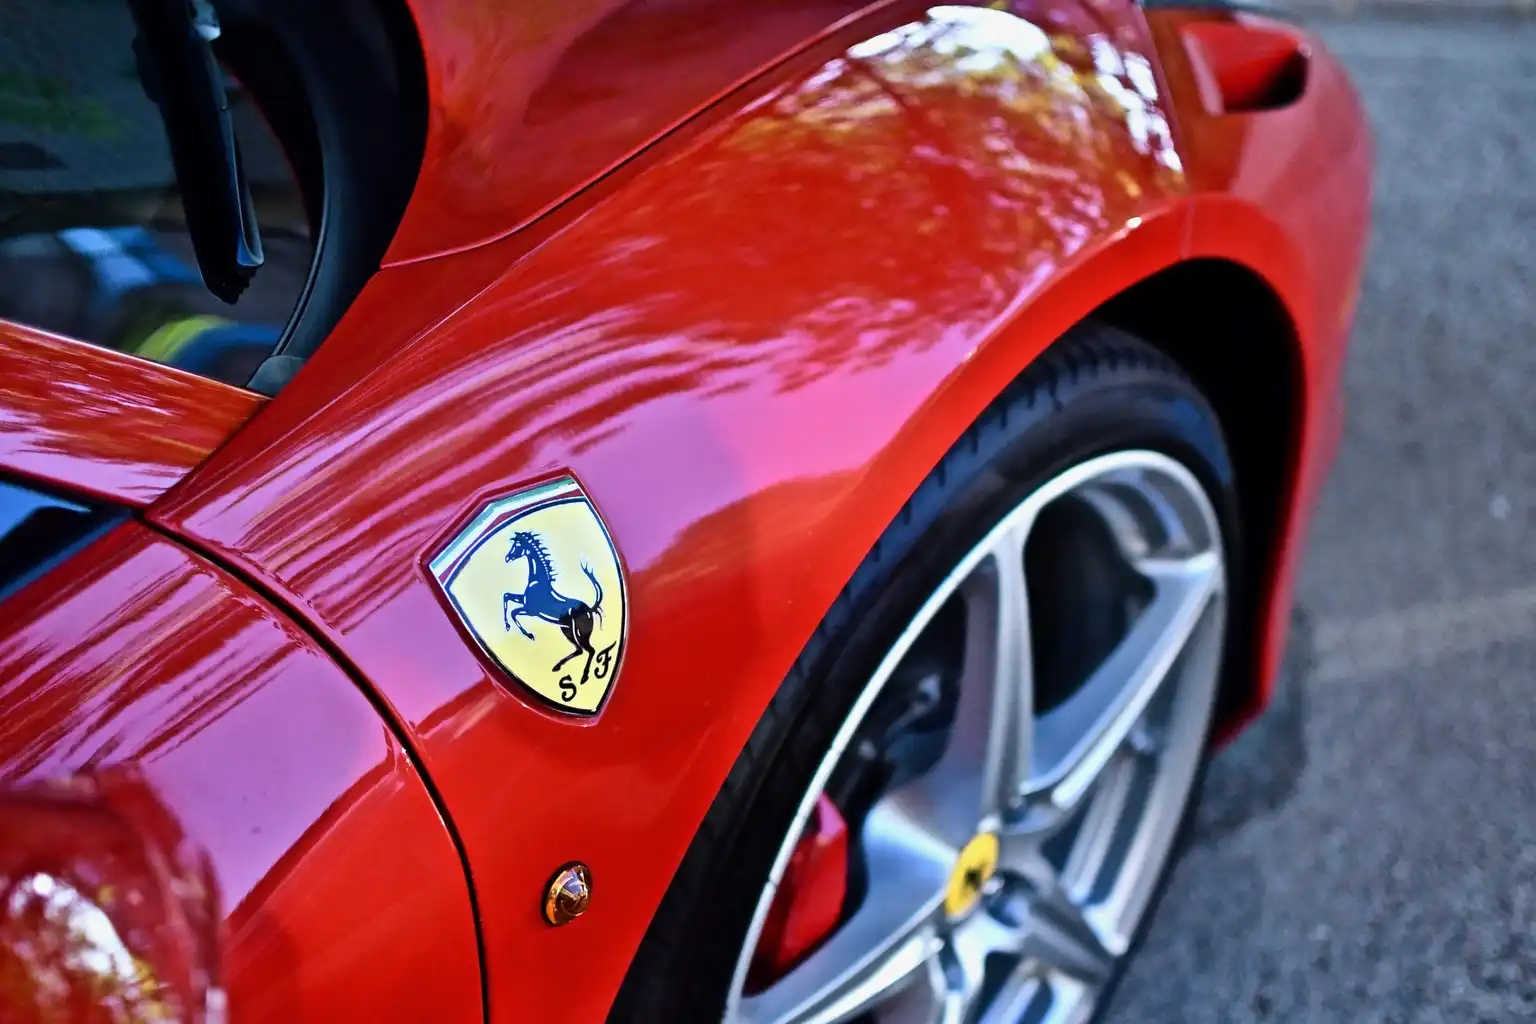 Ferrari: Valuation Revving Up Into The Red RPM Zone - Seeking Alpha